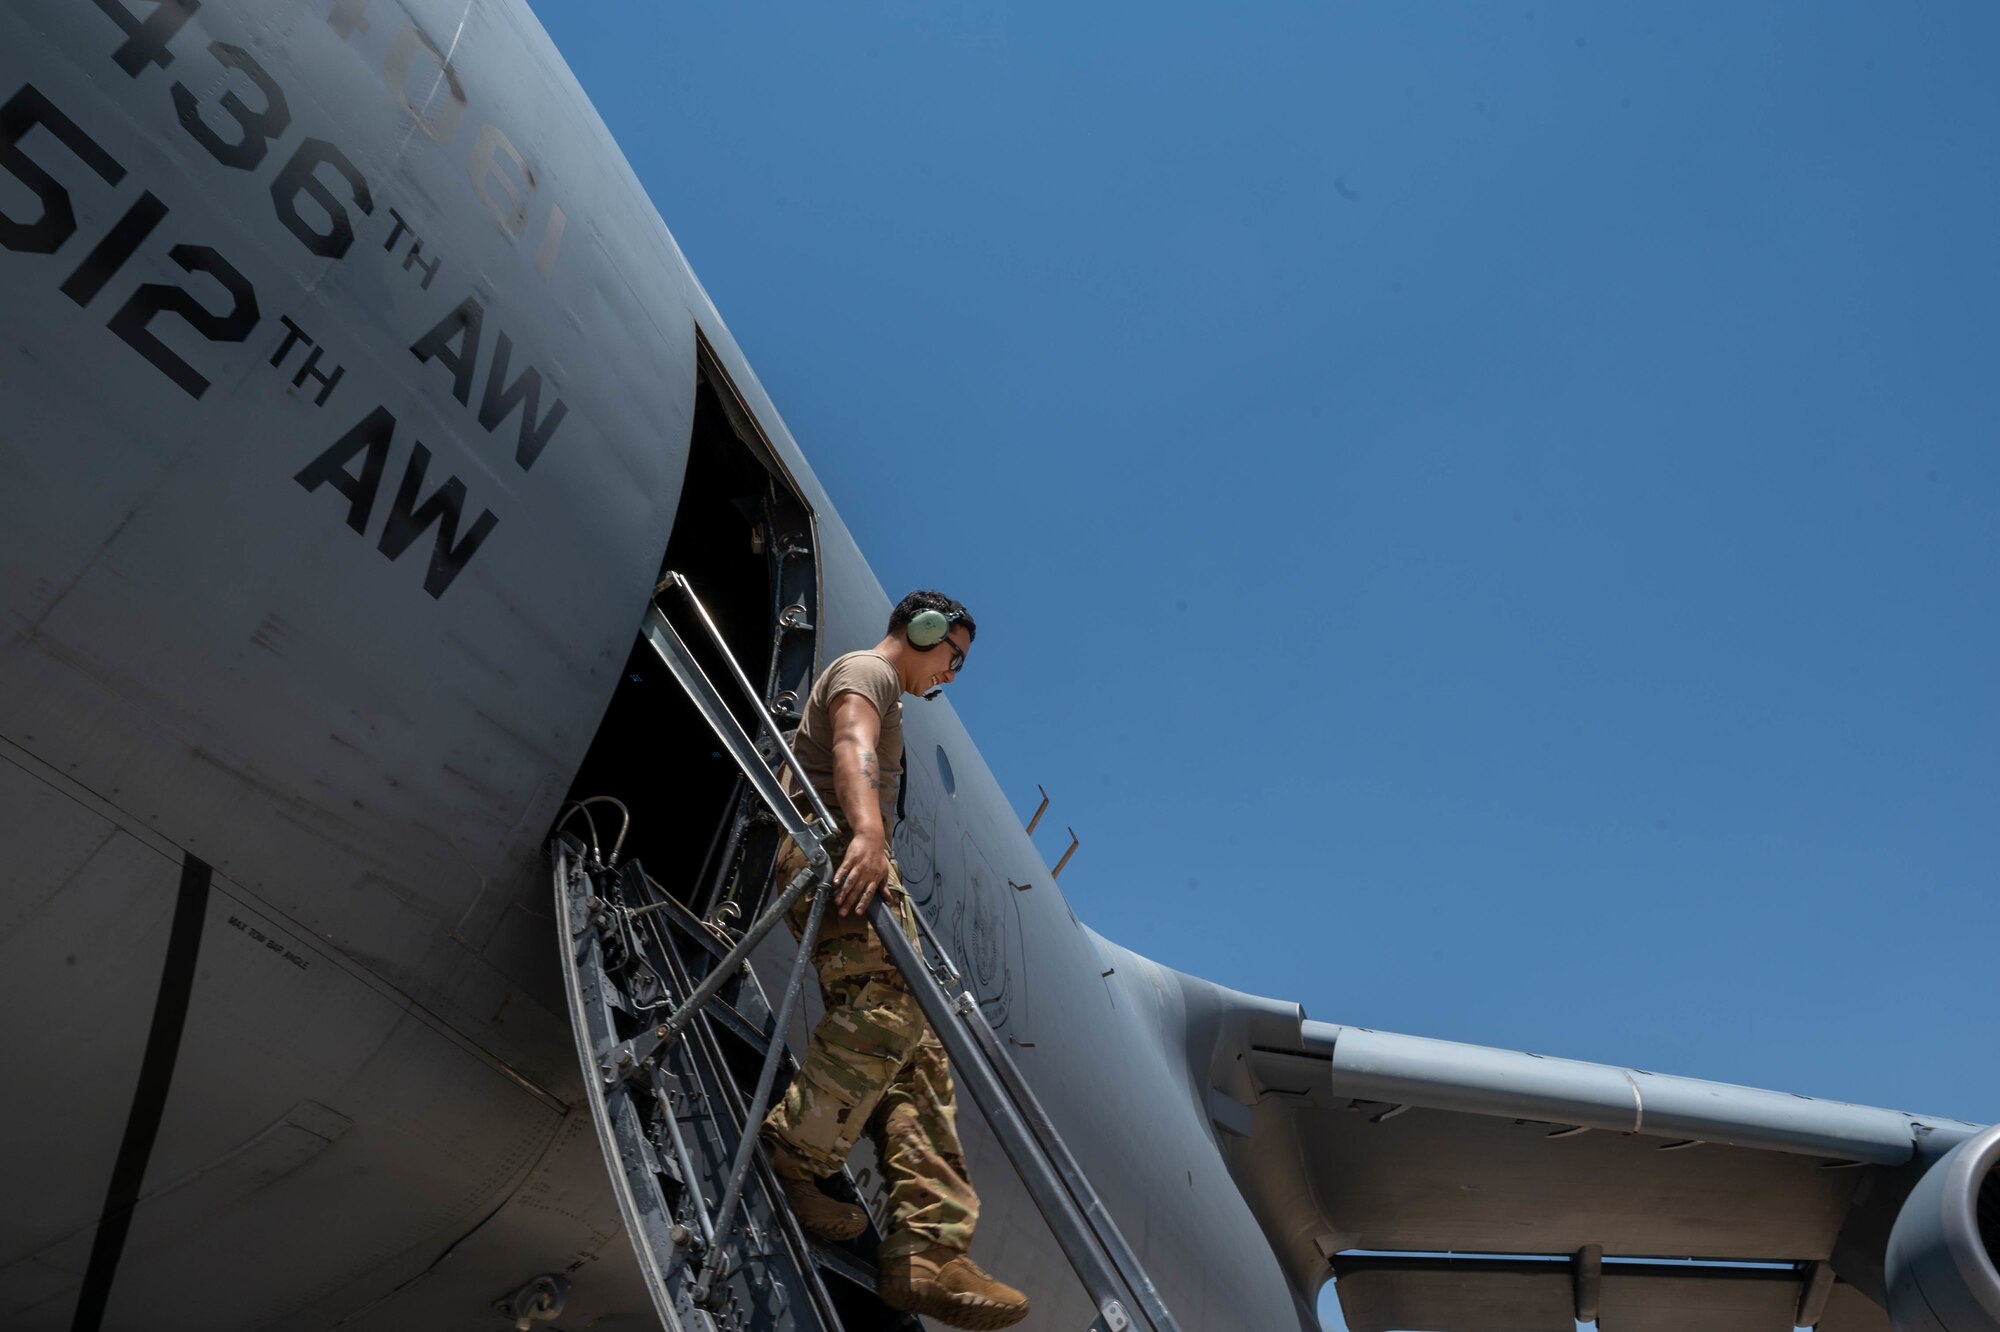 Staff Sgt. Alex Delamarter, 9th Airlift Squadron flight engineer student, climbs down the crew stairs of a Dover Air Force Base C-5M Super Galaxy during a Major Command Service Tail Trainer at Holloman AFB, New Mexico, June 7, 2021. The 9th AS performs MSTTs to expedite upgrade and qualification training for C-5M loadmasters and flight engineers. This MSTT was coordinated in partnership with Air Education Training Command’s 49th Wing and Air Force Materiel Command’s 635th Materiel Maintenance Group. (U.S. Air Force photo by Senior Airman Faith Schaefer)